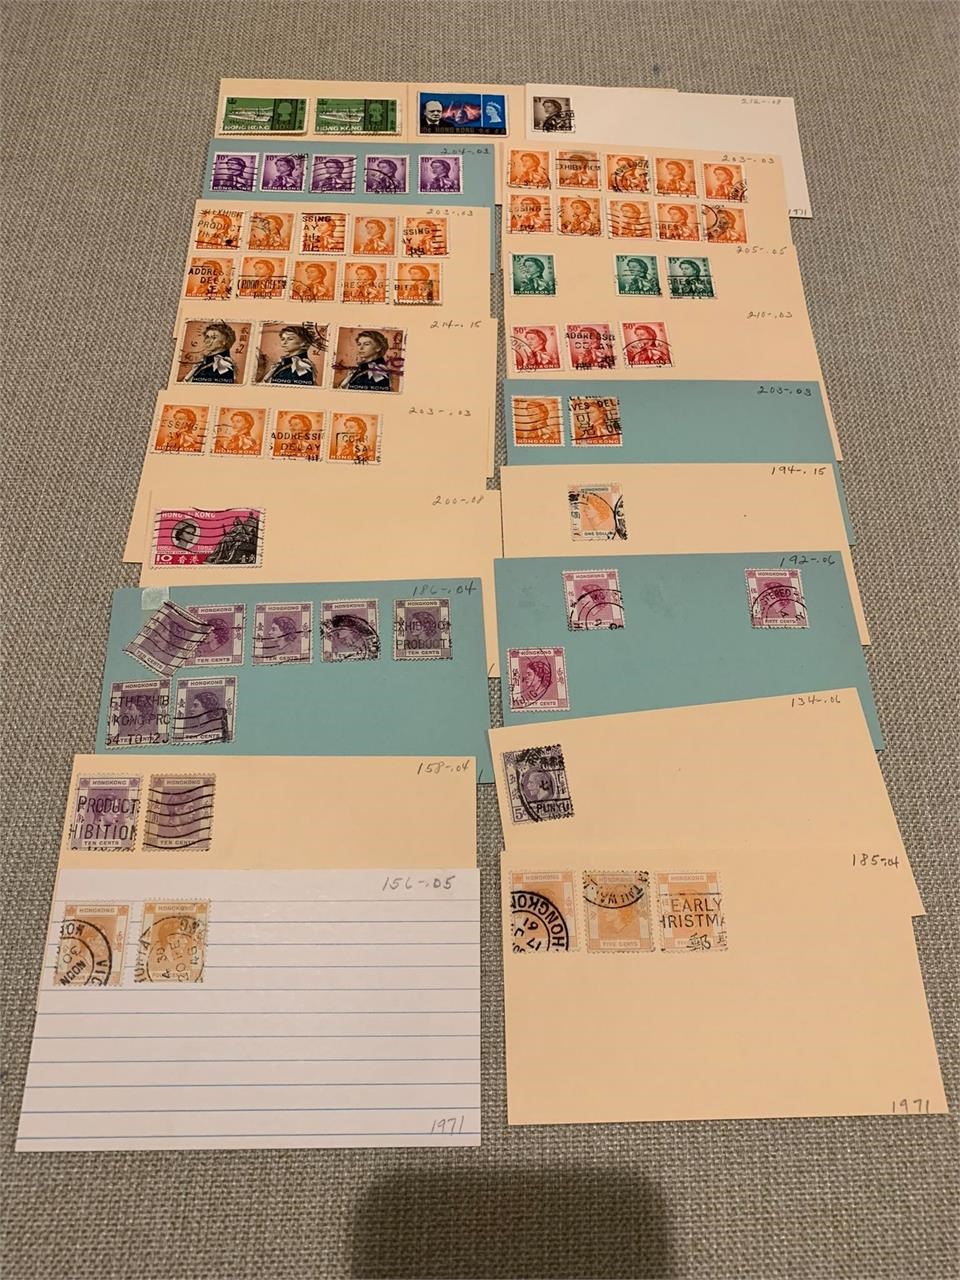 Vintage stamps from Hong Kong